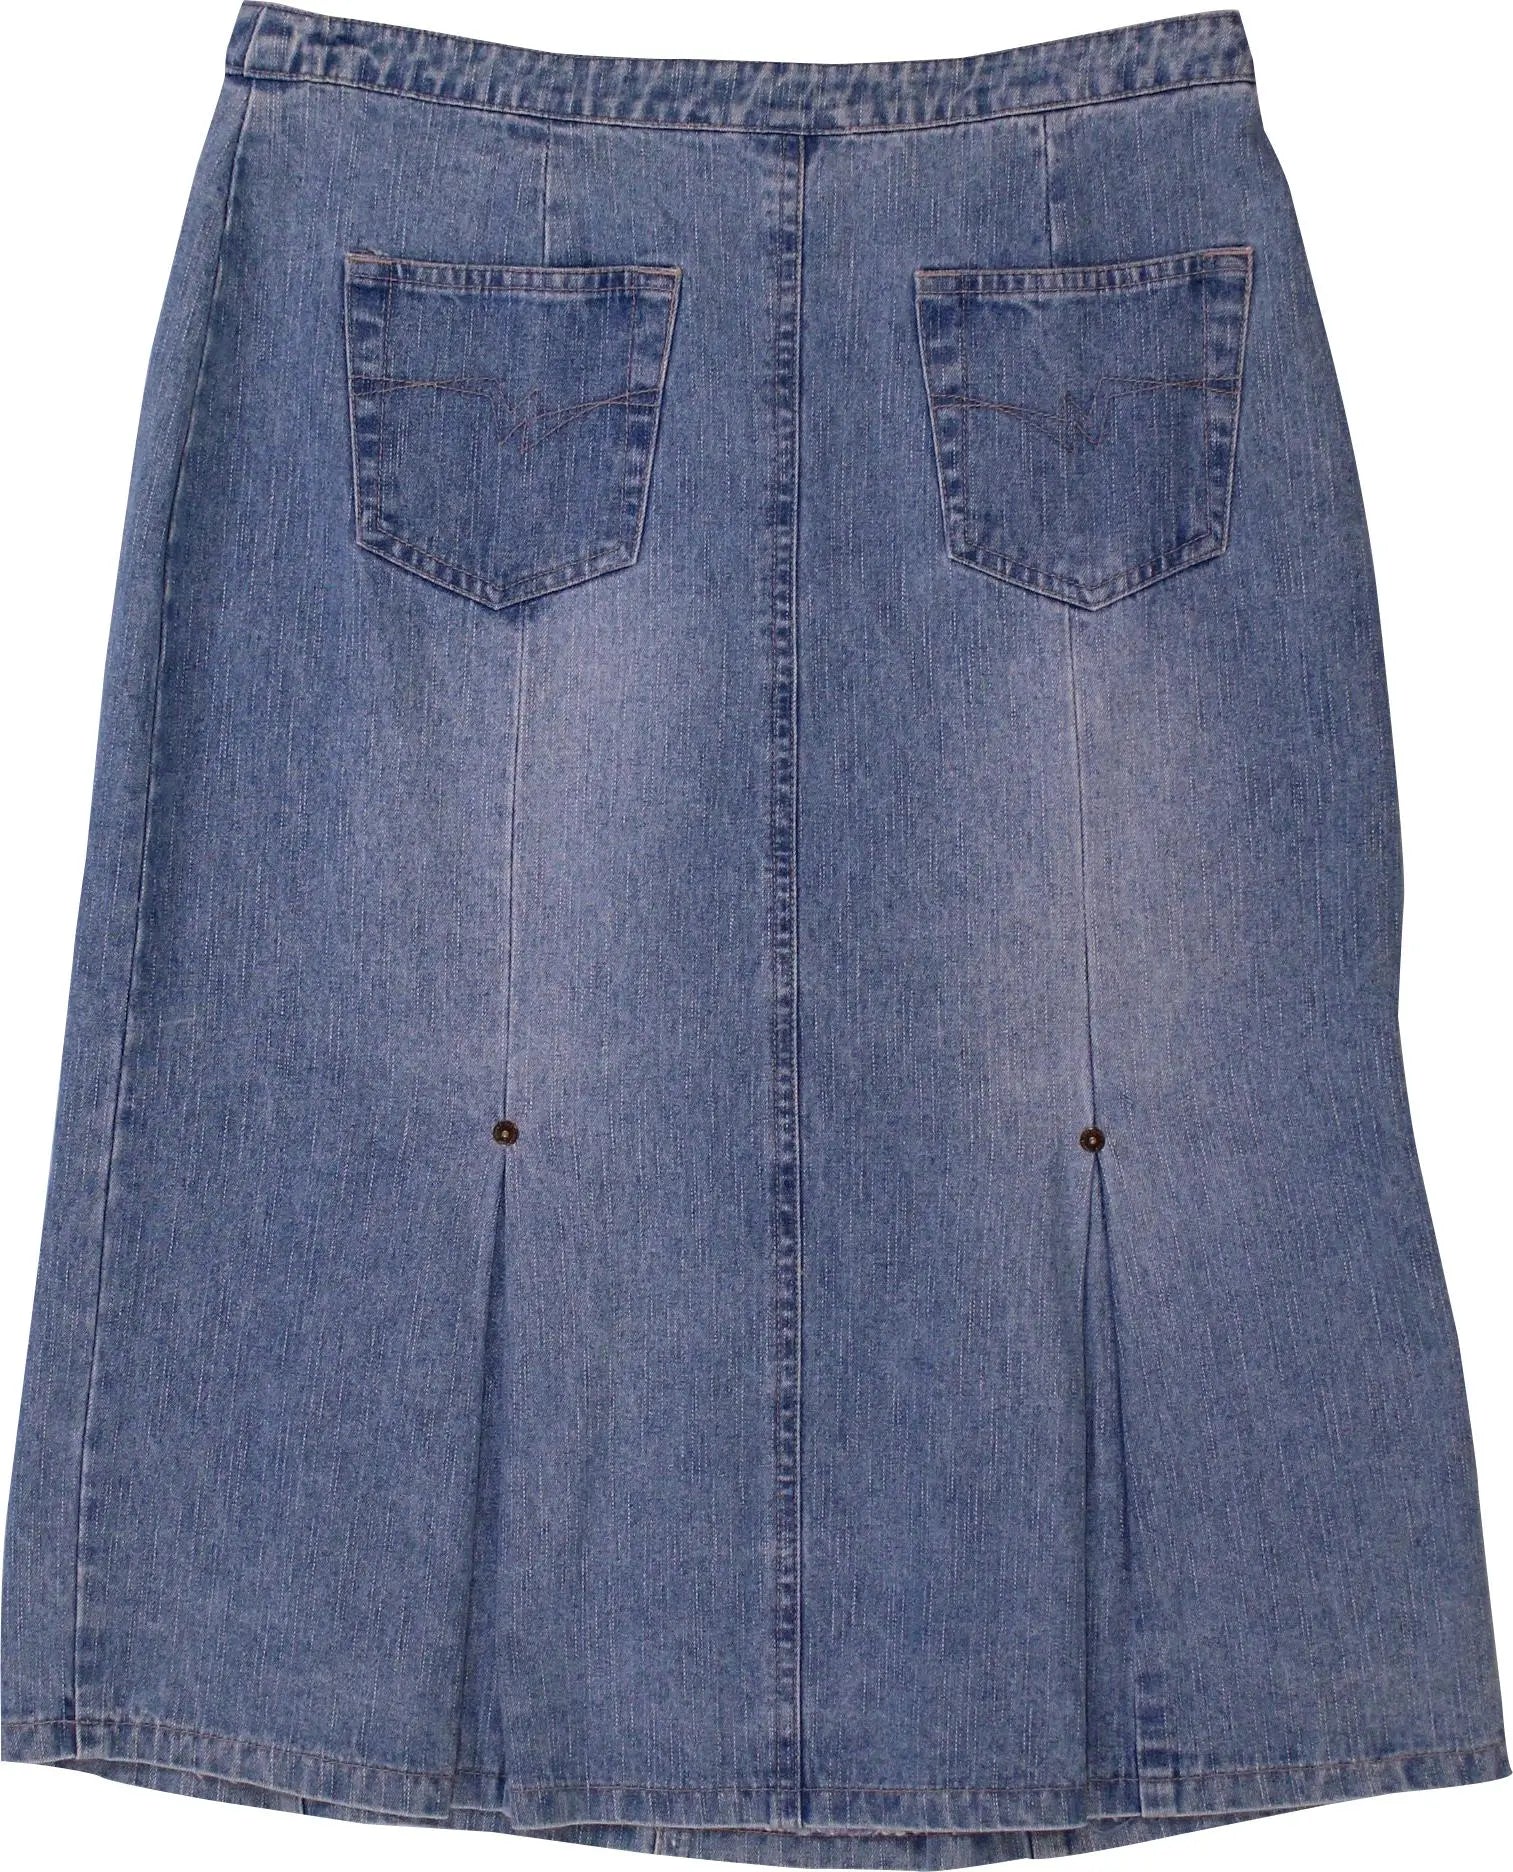 John F. Gee - 00s Denim Skirt- ThriftTale.com - Vintage and second handclothing